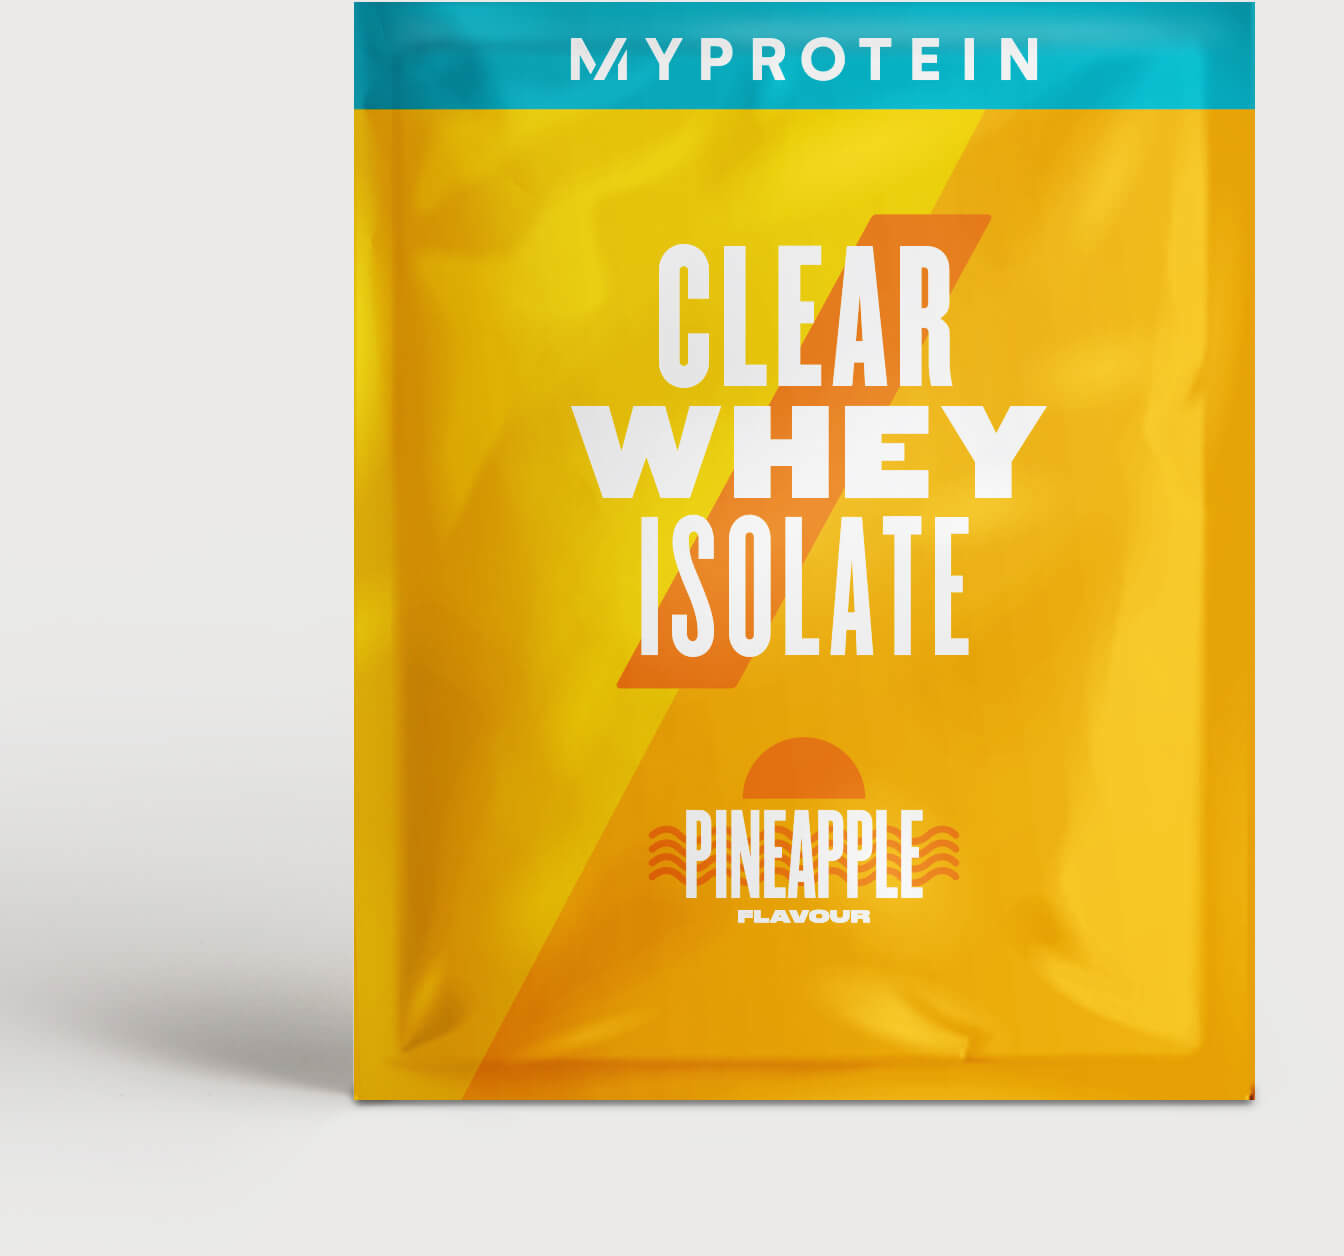 Myprotein Clear Whey Isolate (Sample) - 25g - Ananas